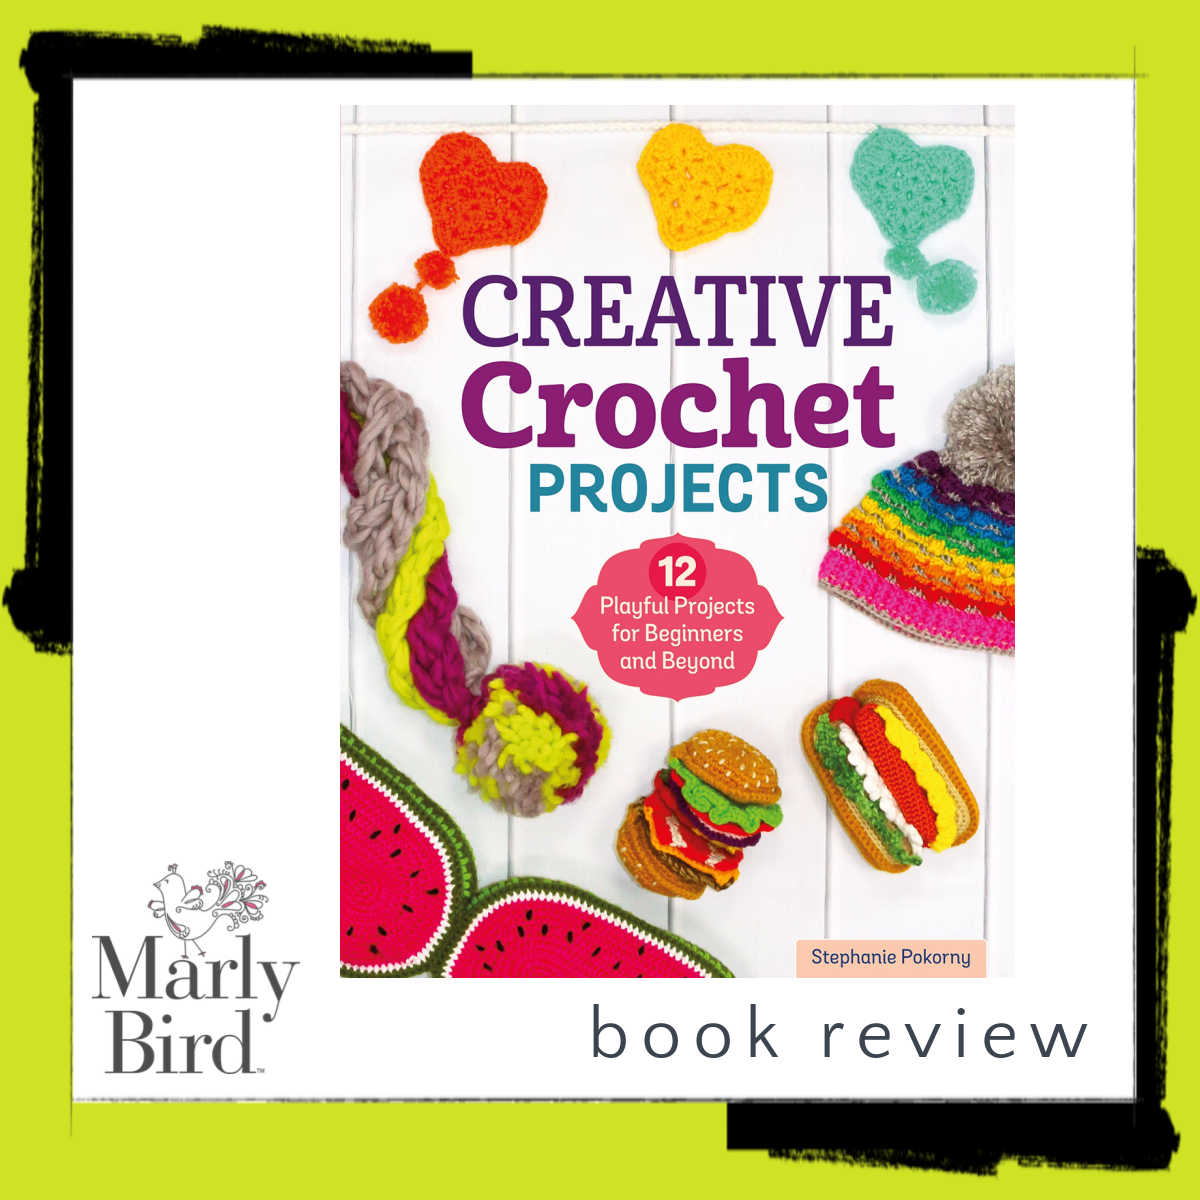 Learn To Crochet With This Beginner-Friendly Guide: 365 Days of Inspiring  Crochet Patterns and Projects | Unleash Your Creativity with a Year's Worth